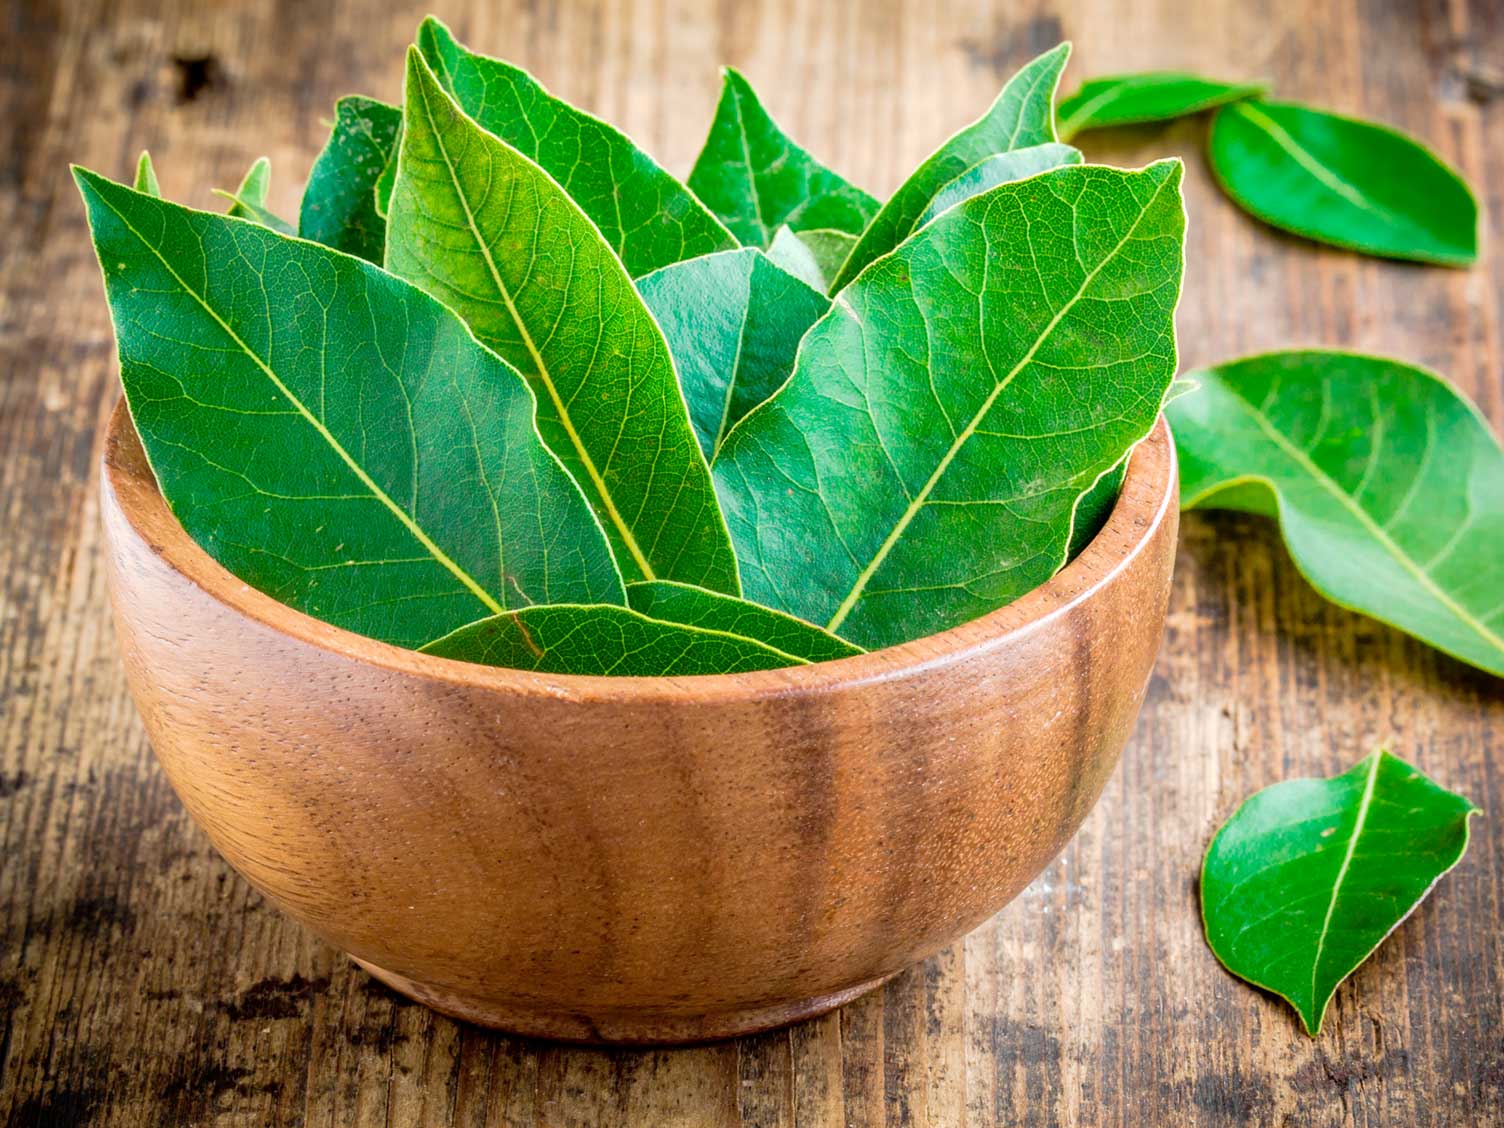 Bay leaves ready for use in cooking